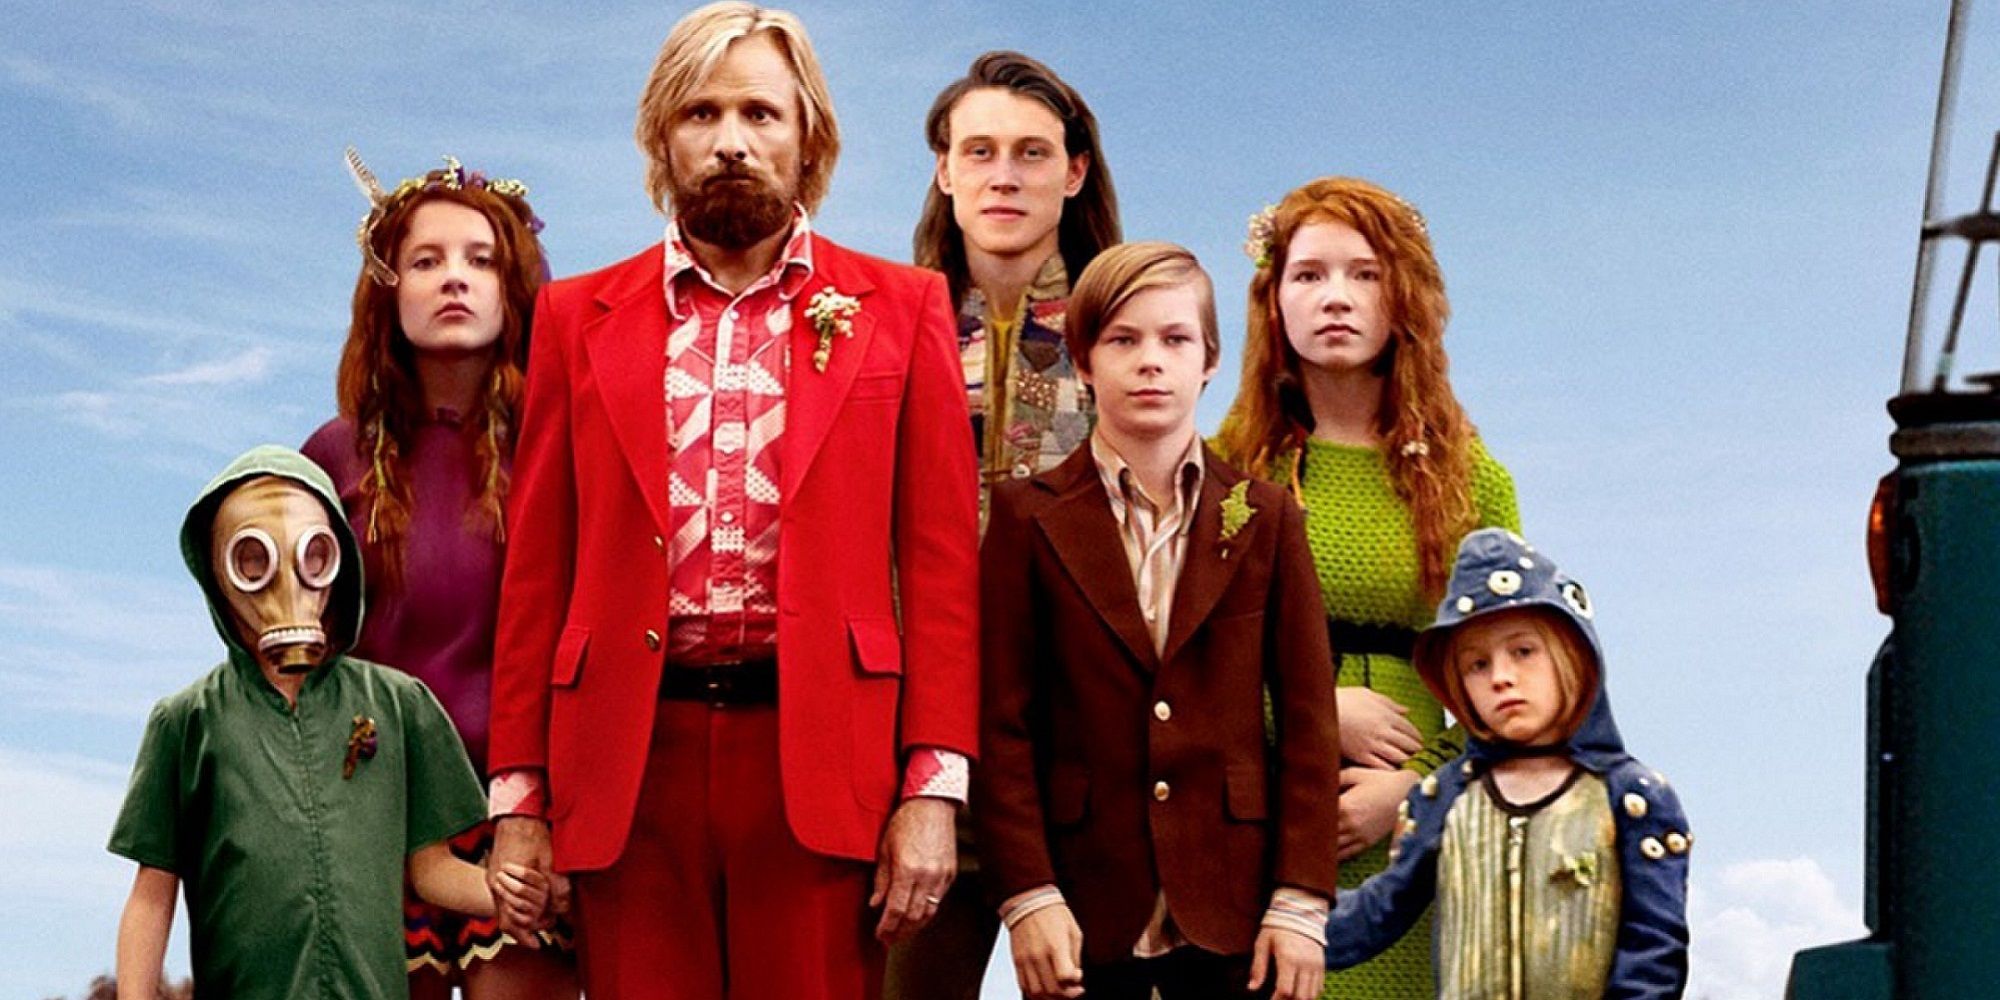 The lead cast of Captain Fantastic standing together.